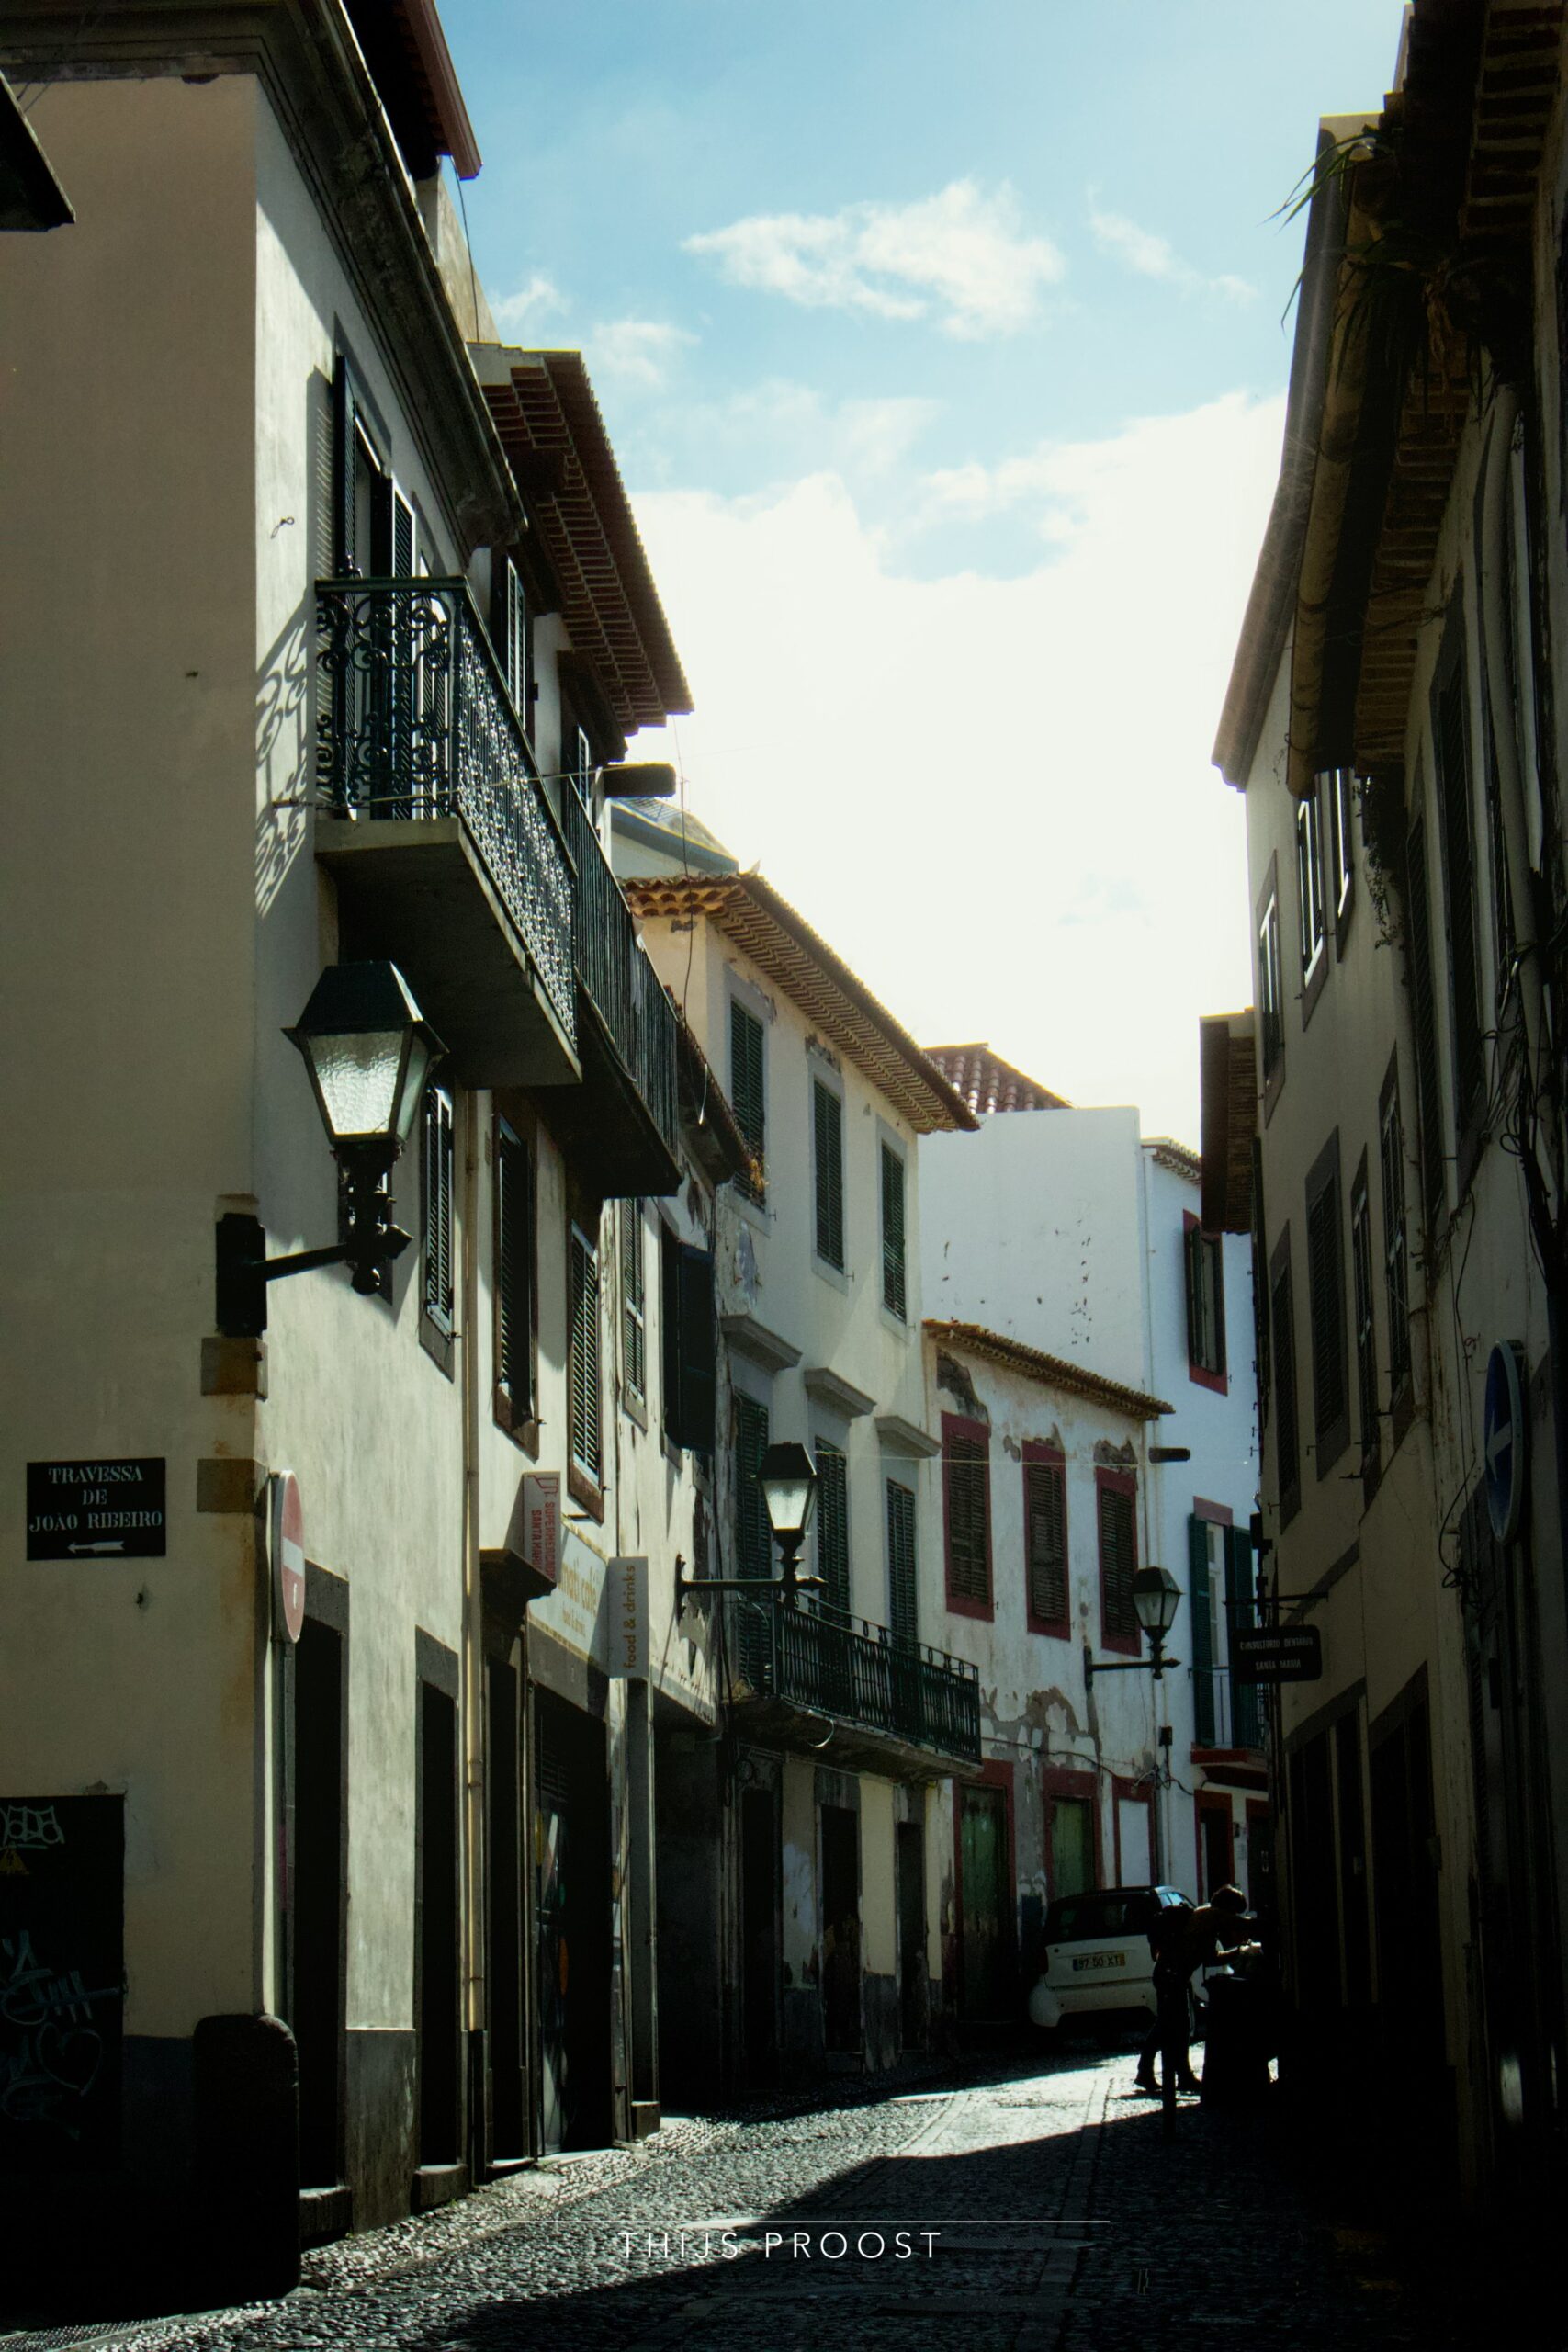 A view on a old street in the center of Funchal Madeira. Light falls on the cobblestones in the center of the street.